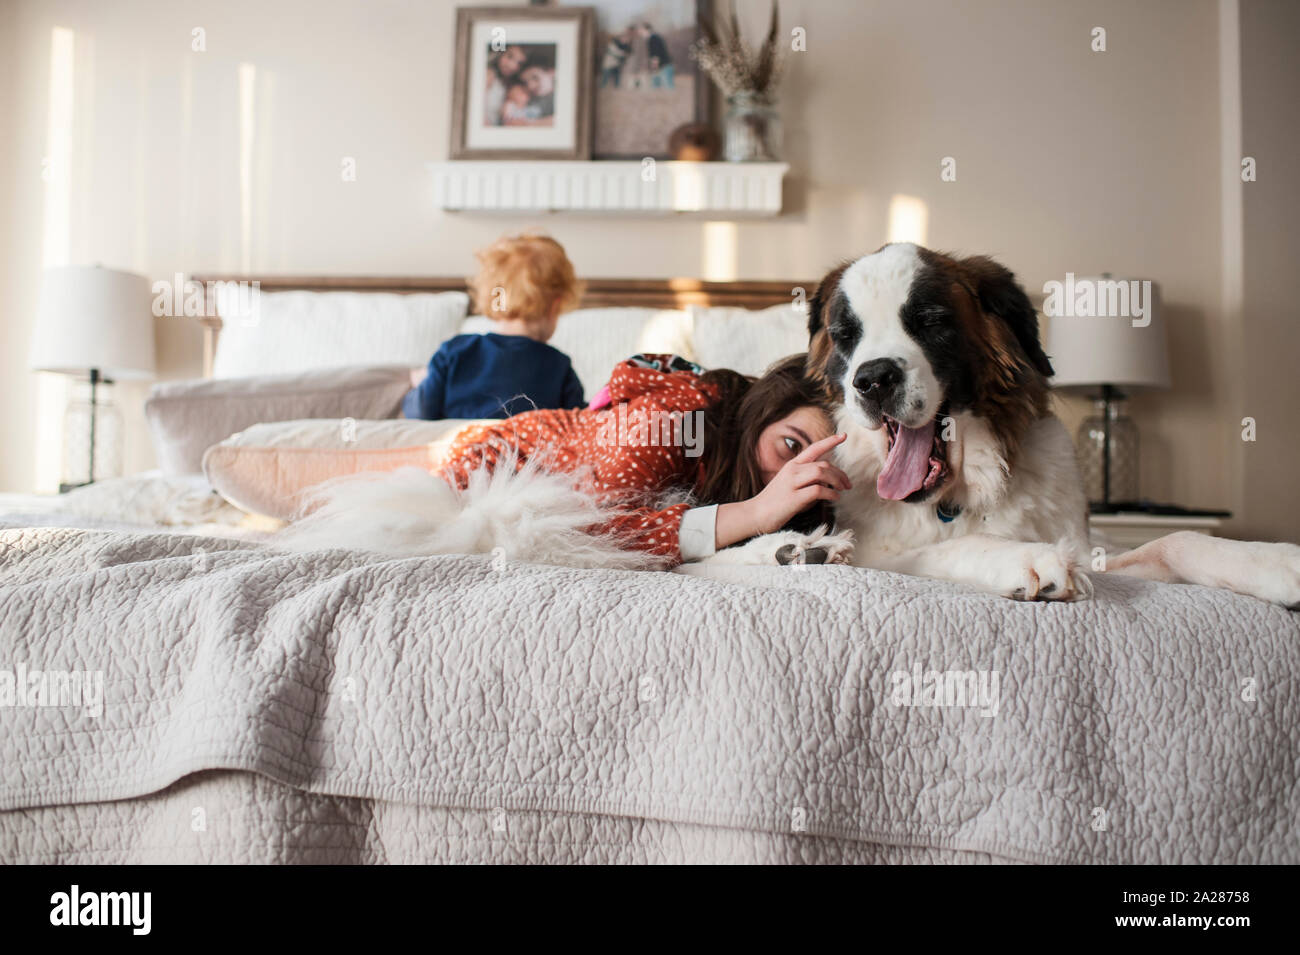 Kids lay on bed with large dog while girl tries to touch dogs tongue Stock Photo